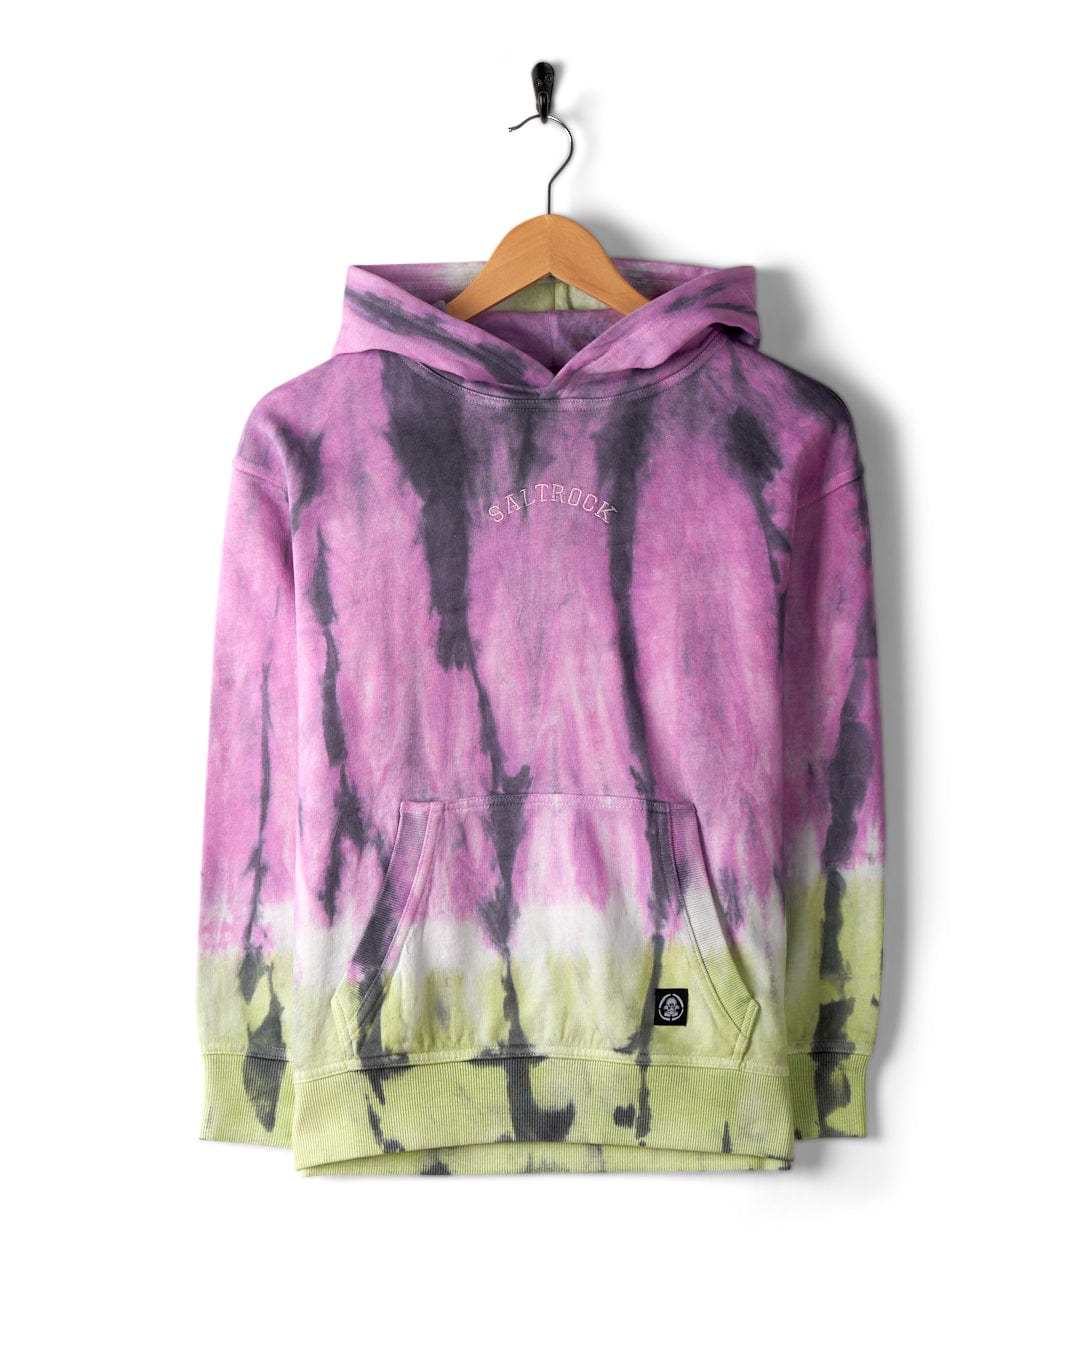 A 100% cotton tie-dye hoodie in shades of purple, black, and green hangs on a wooden hanger against a white background. The Rock Valley - Pop Hoodie - Multi by Saltrock features a front pocket, Saltrock branding, and a small label at the bottom.